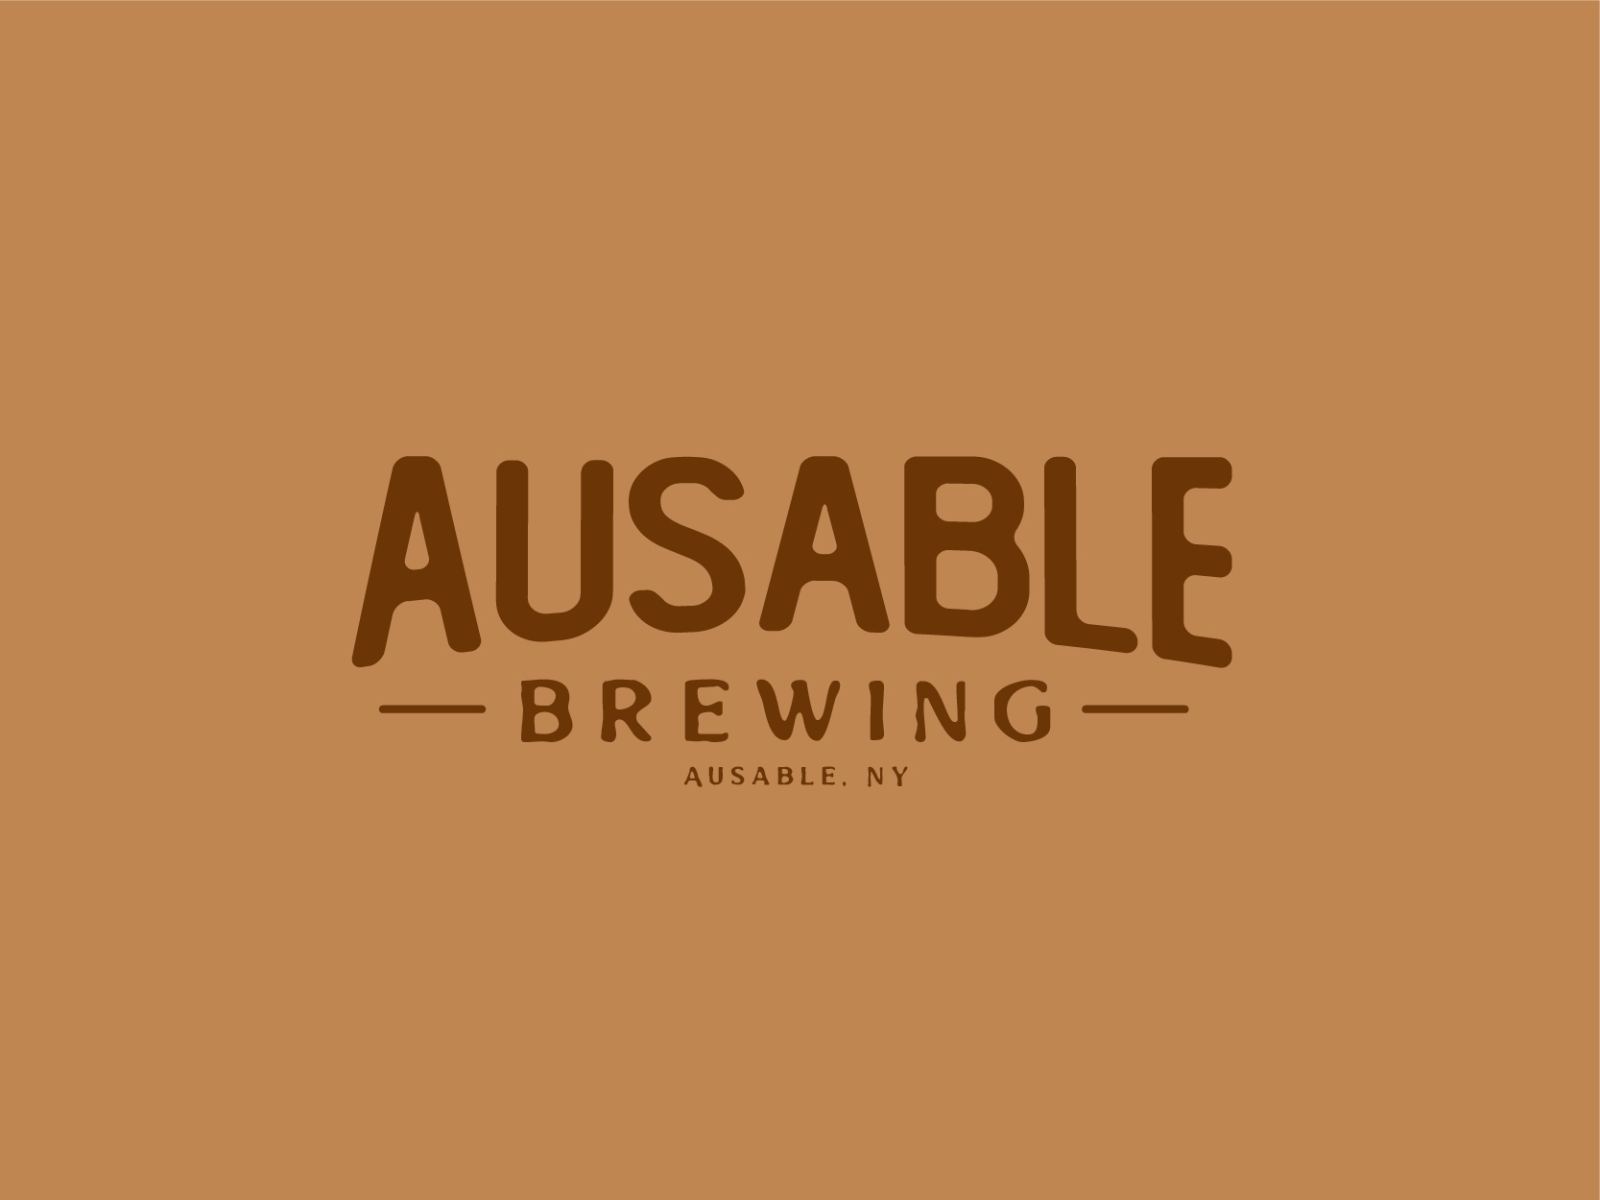 Ausable Brewing by Emily Hamilton on Dribbble